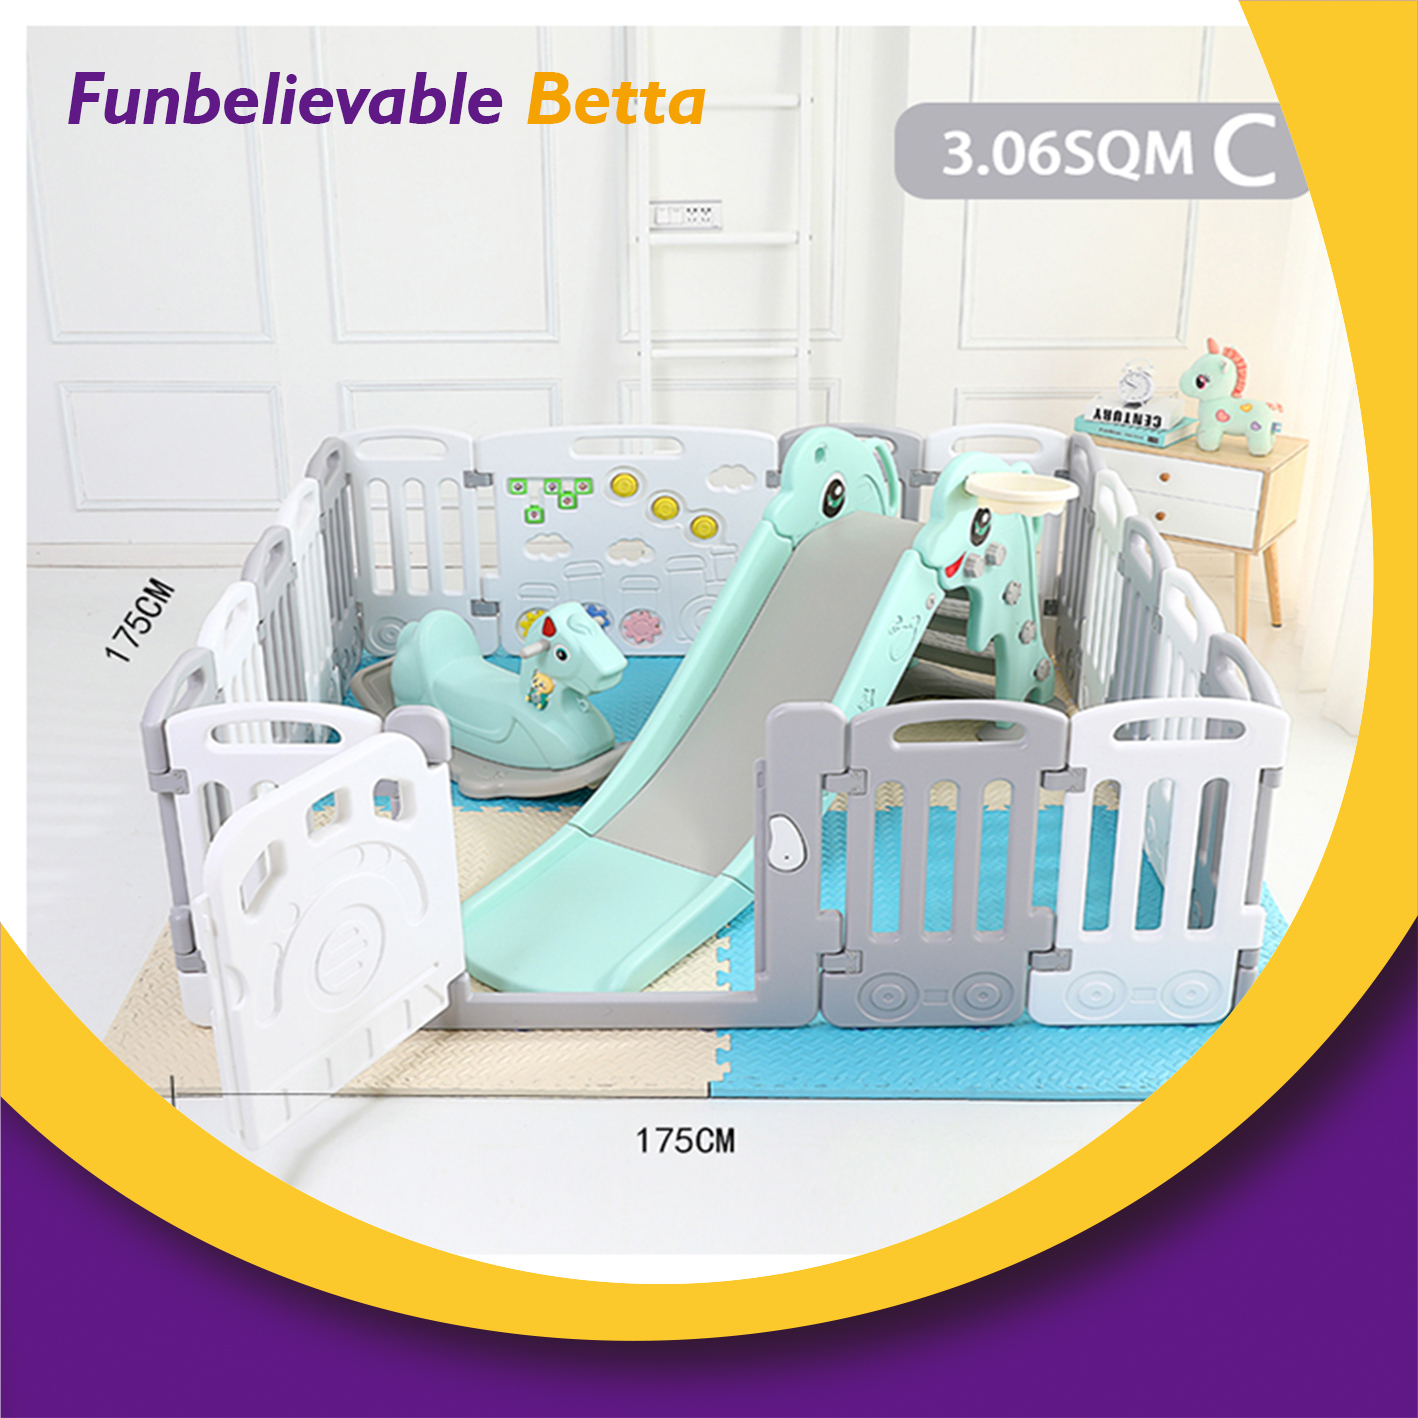 Bettaplay baby fence with gate safety fence plastic kids soft play fence large baby playpen